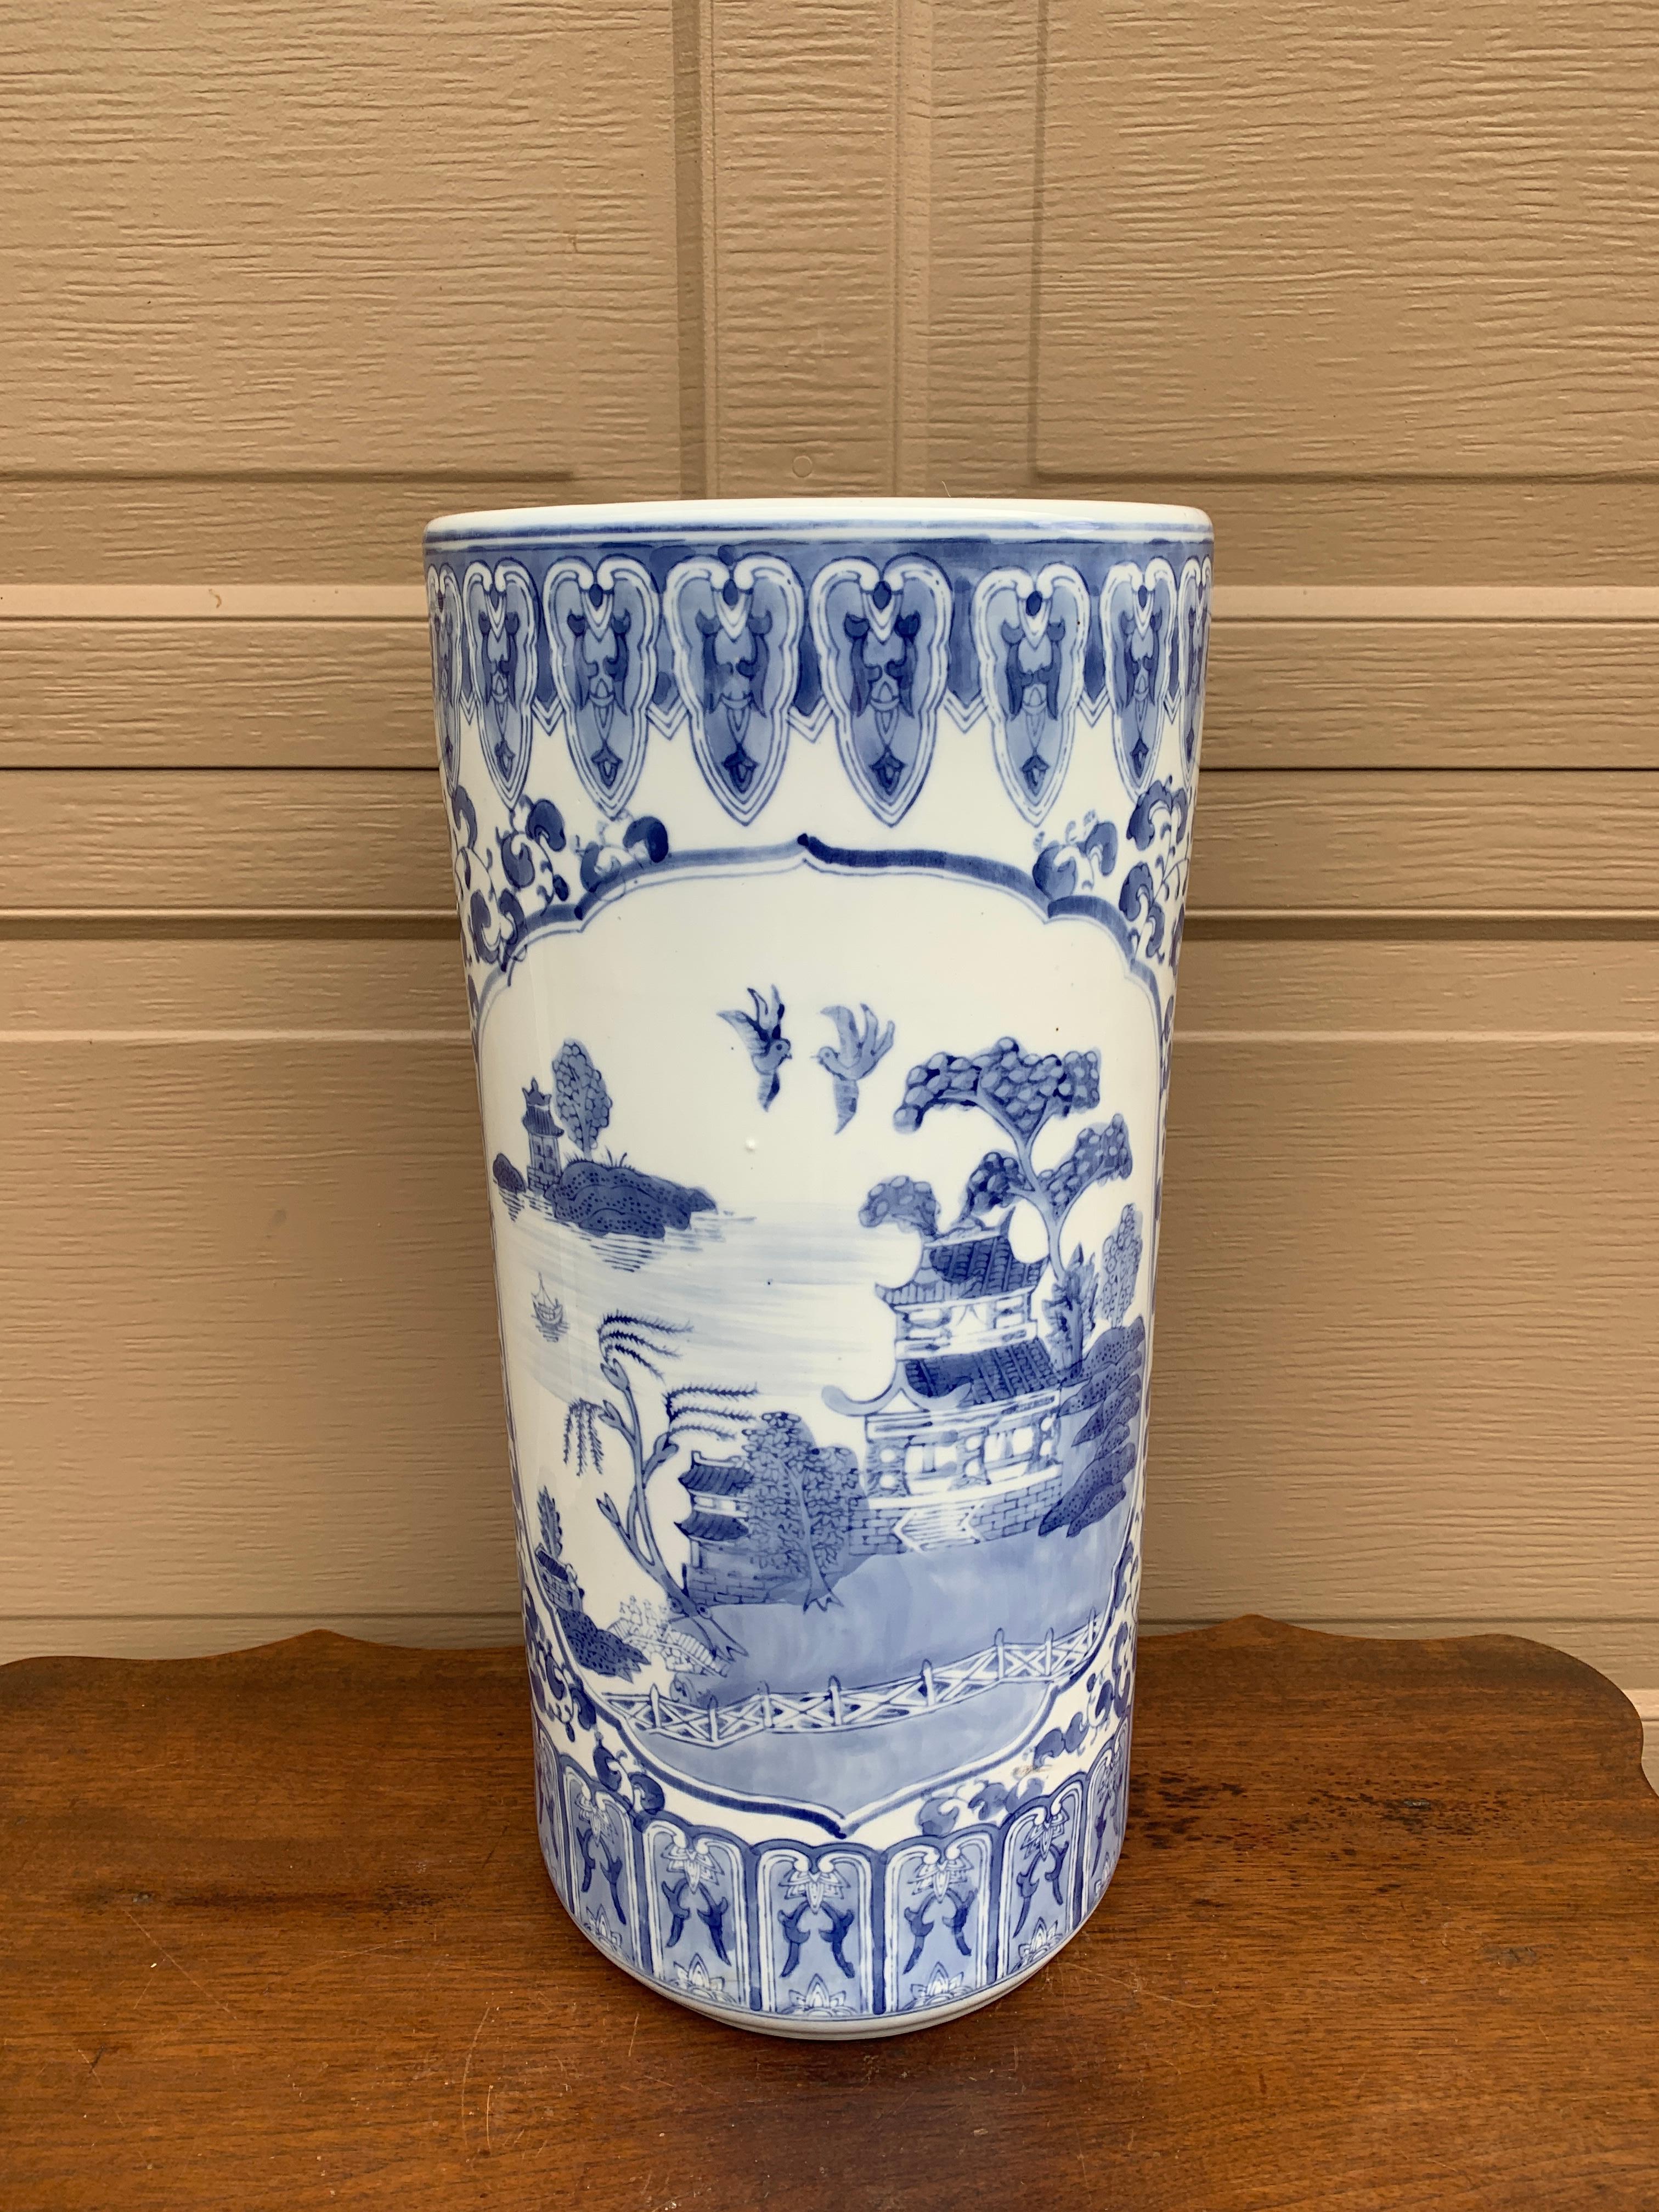 A gorgeous Chinoiserie blue and white porcelain umbrella or cane stand with Asian landscape scenes featuring pagodas

China, Late 20th Century

Measures: 9